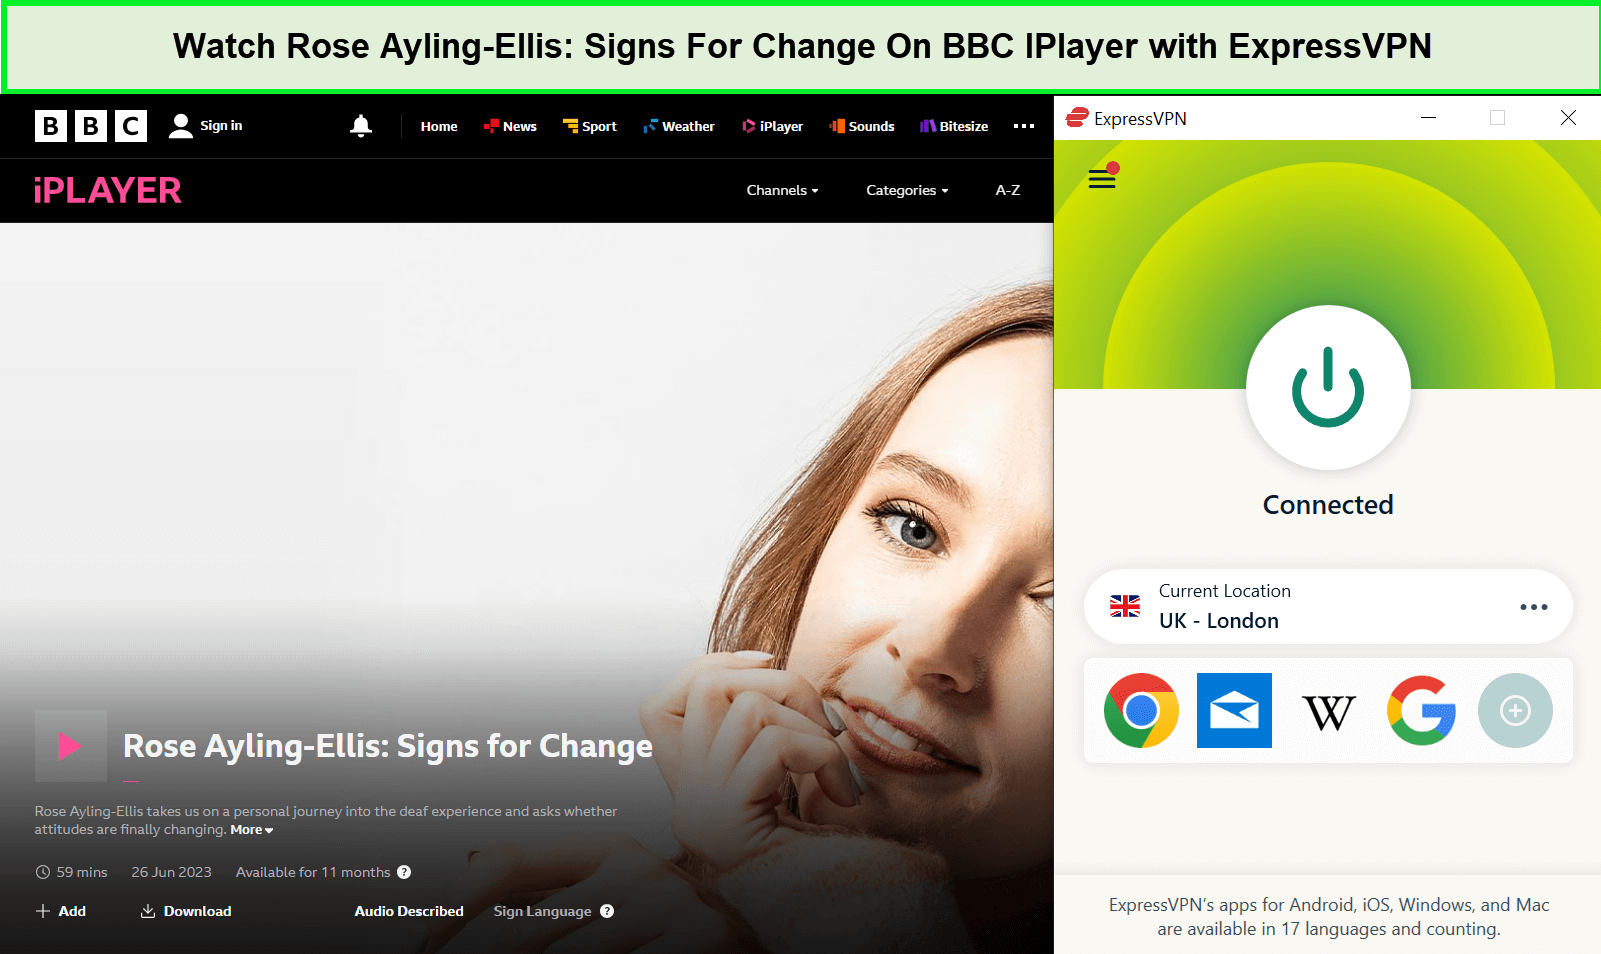 Sehen Sie sich „Rose-Ayling-Ellis-Signs-For-Change-in-USA-On-BBC-IPlayer-with-ExpressVPN“ an